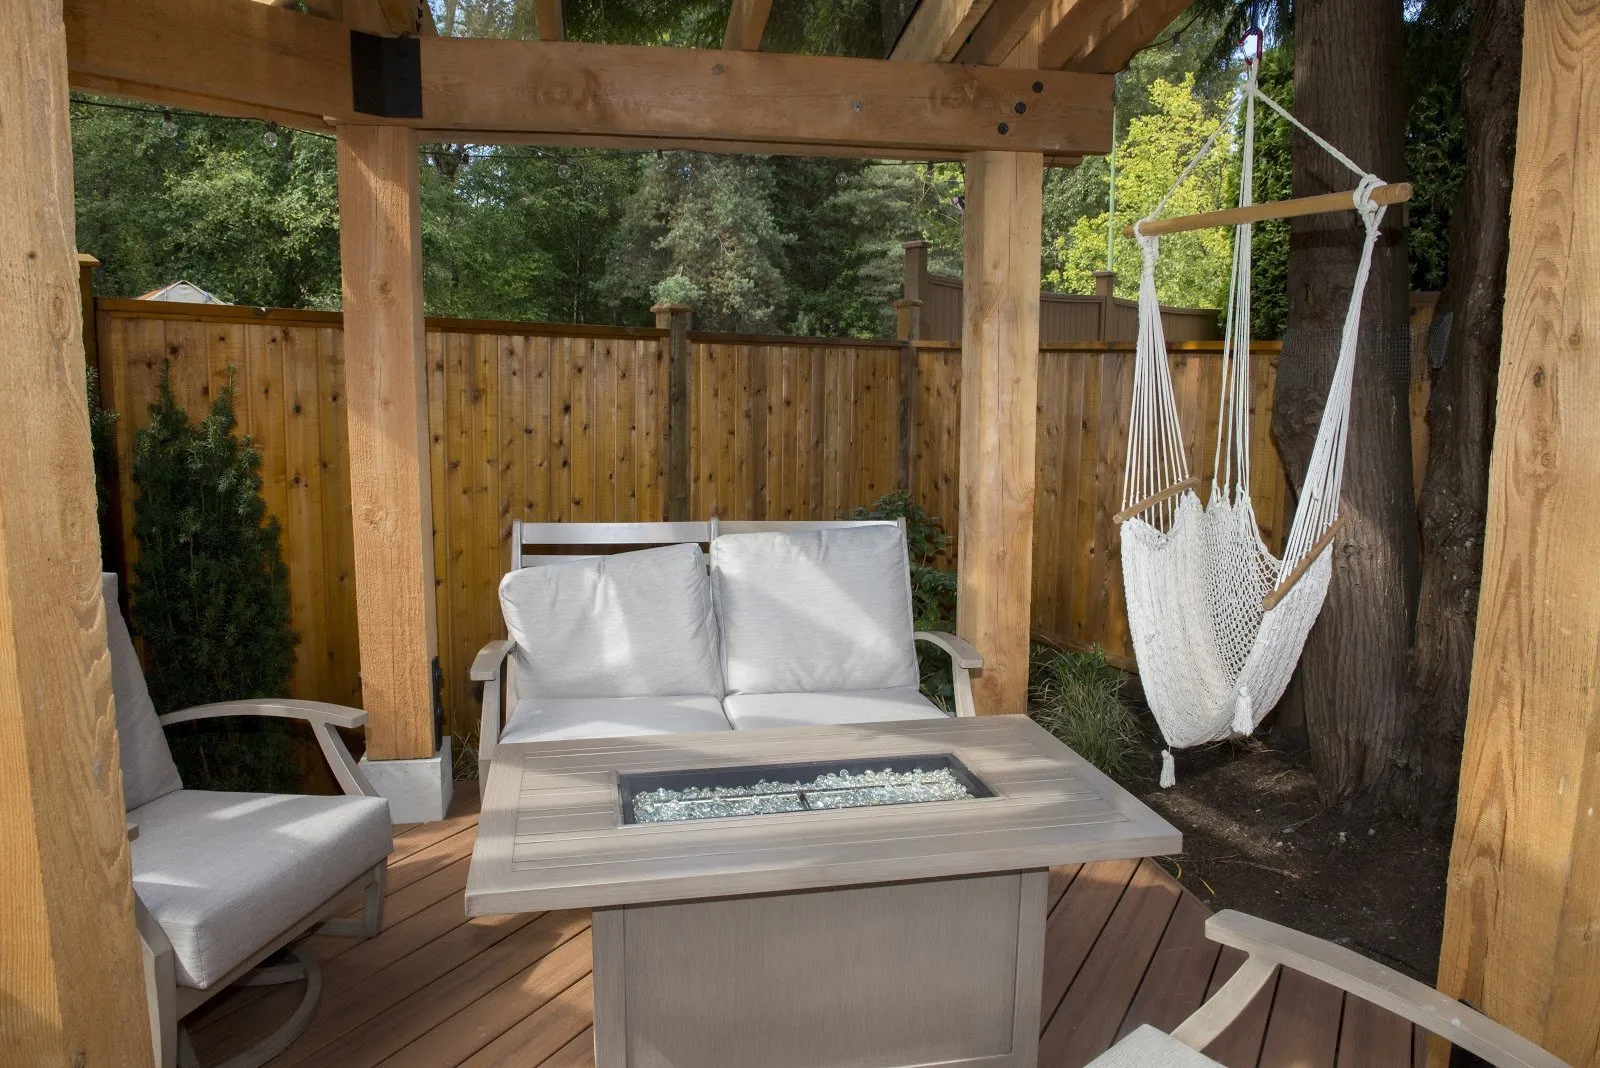 Hyland - Summer Living: 10 Must-Haves To Make Your Backyard Awesome - cover